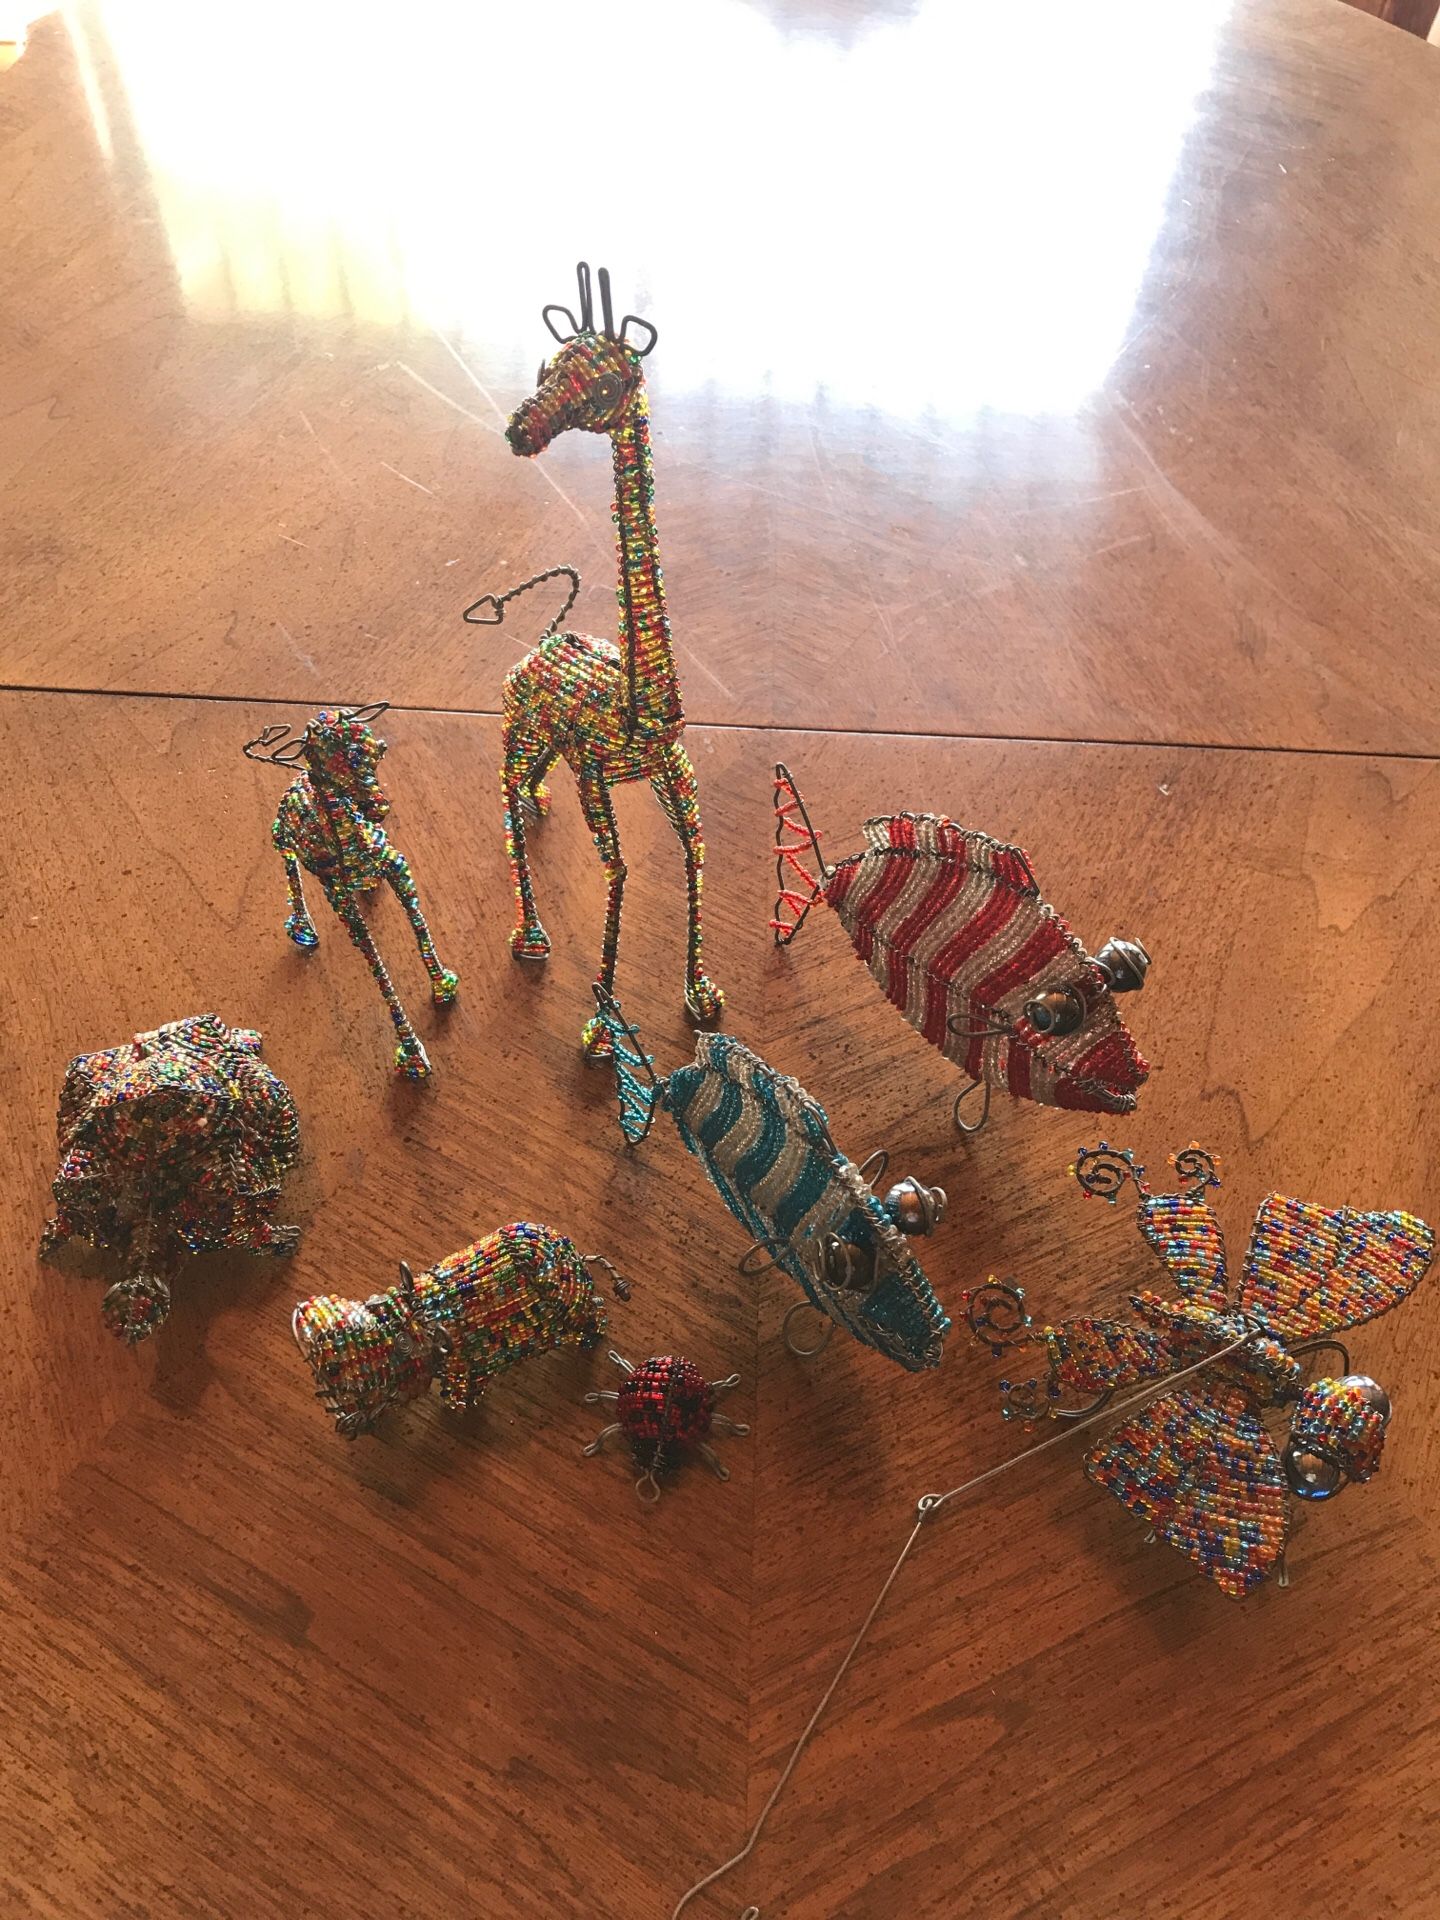 Hand crafted animals made of wire and beads